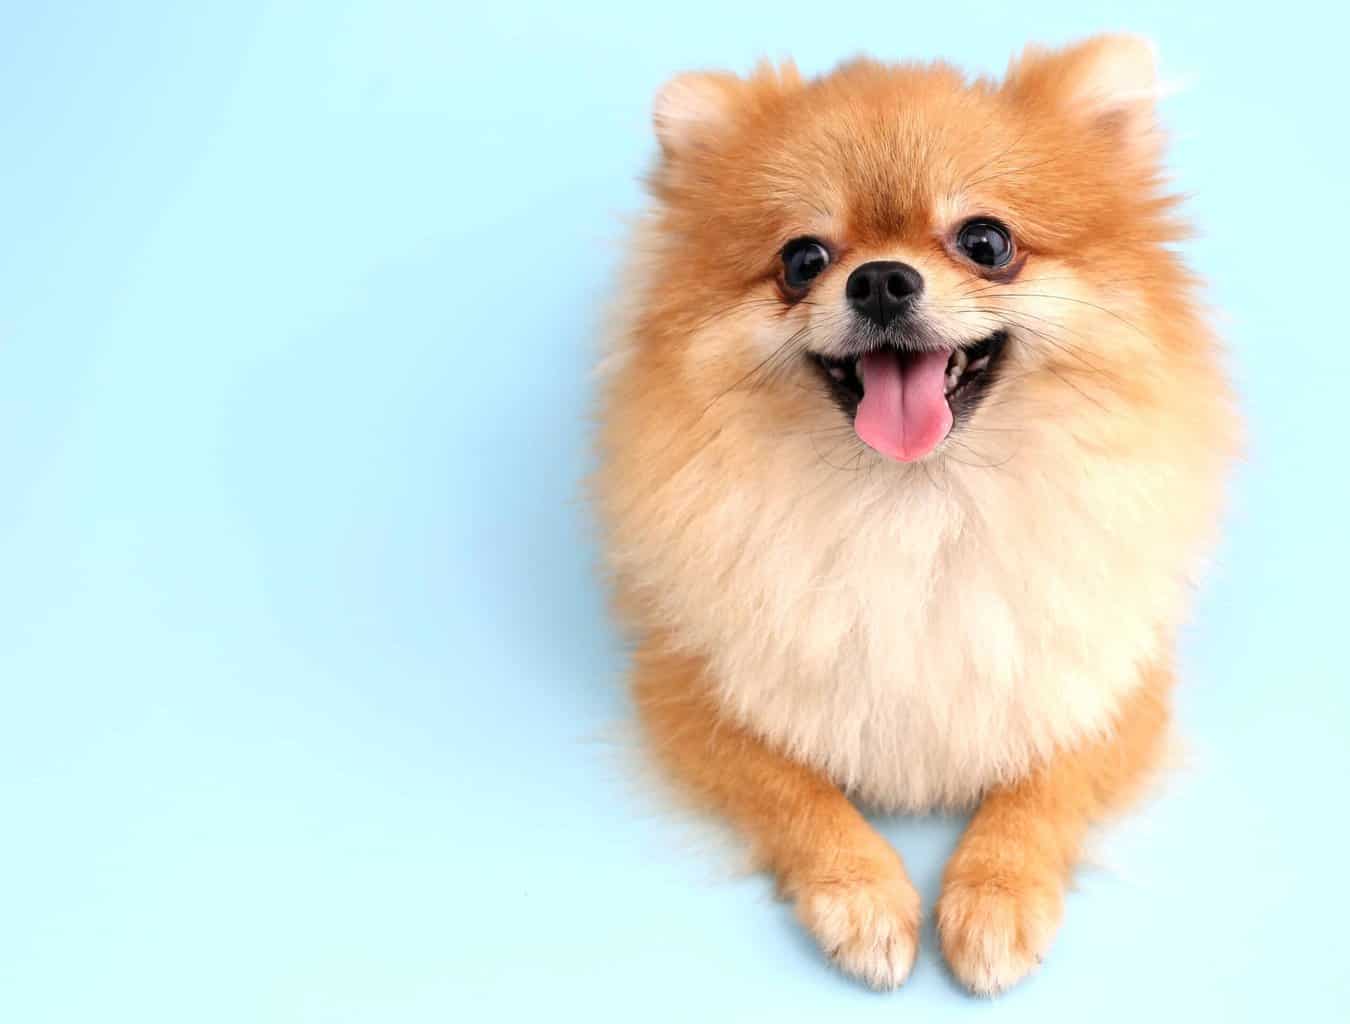 Happy Pomeranian on blue background. Make your dog sit or be in a down position when you meet someone.